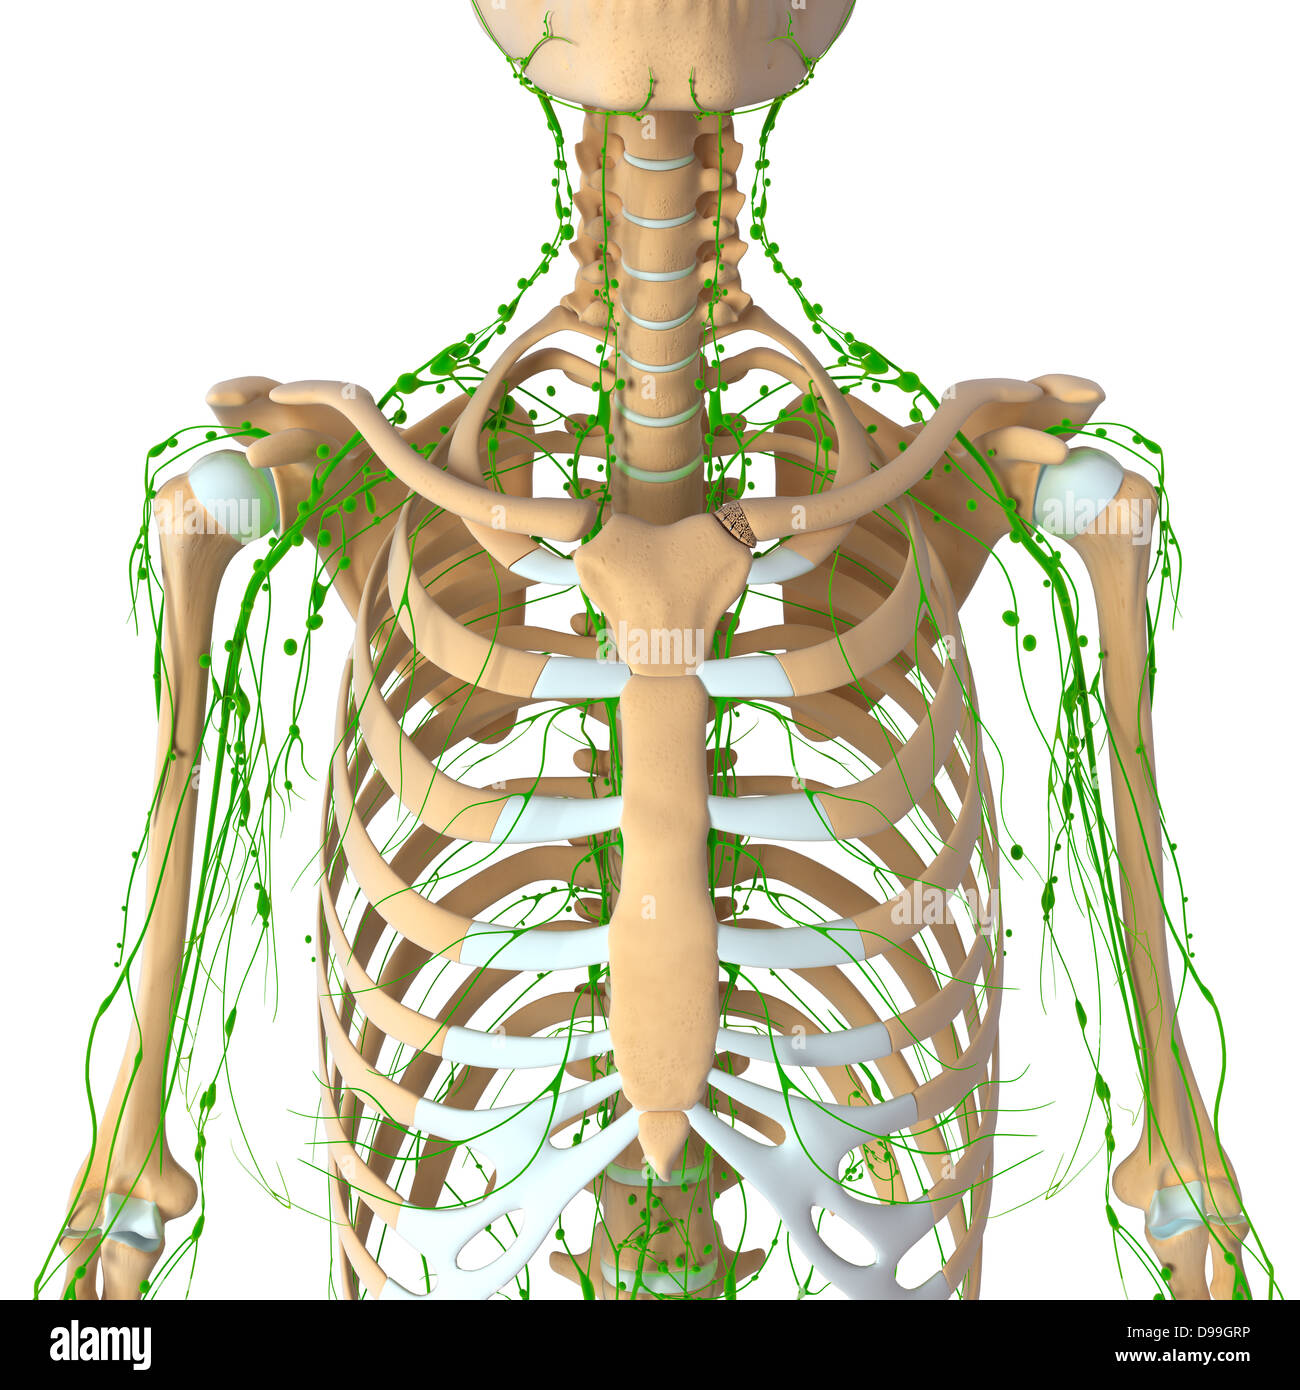 Lymphatic system of human body anatomy Stock Photo